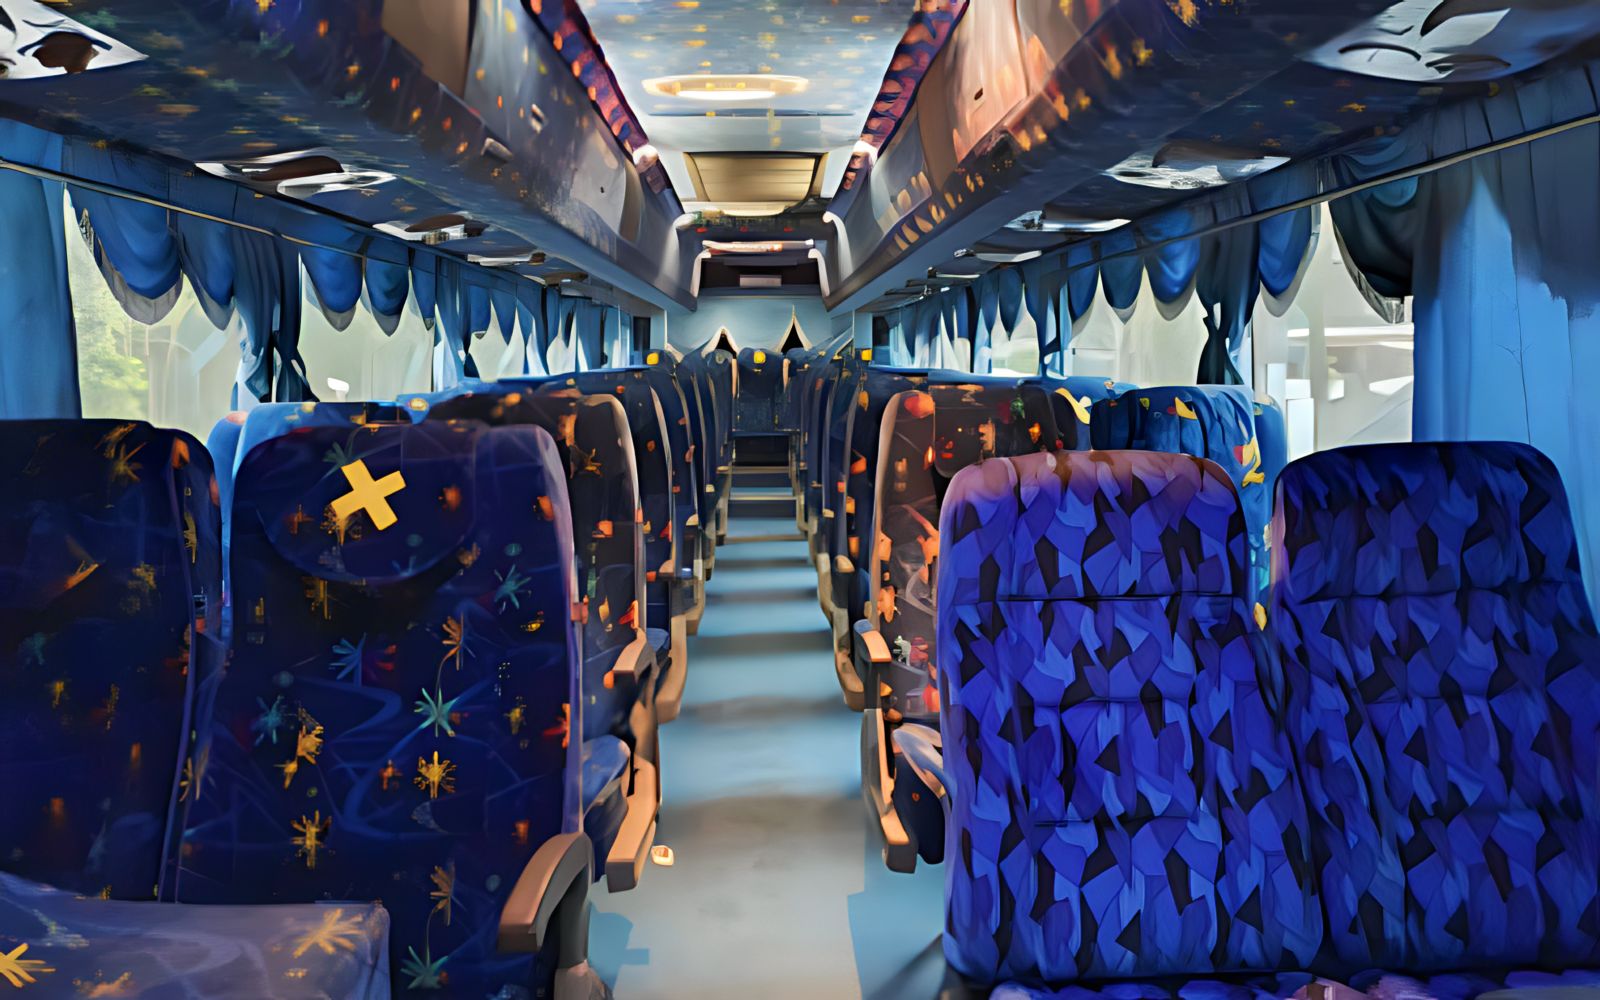 Inside of out Buses